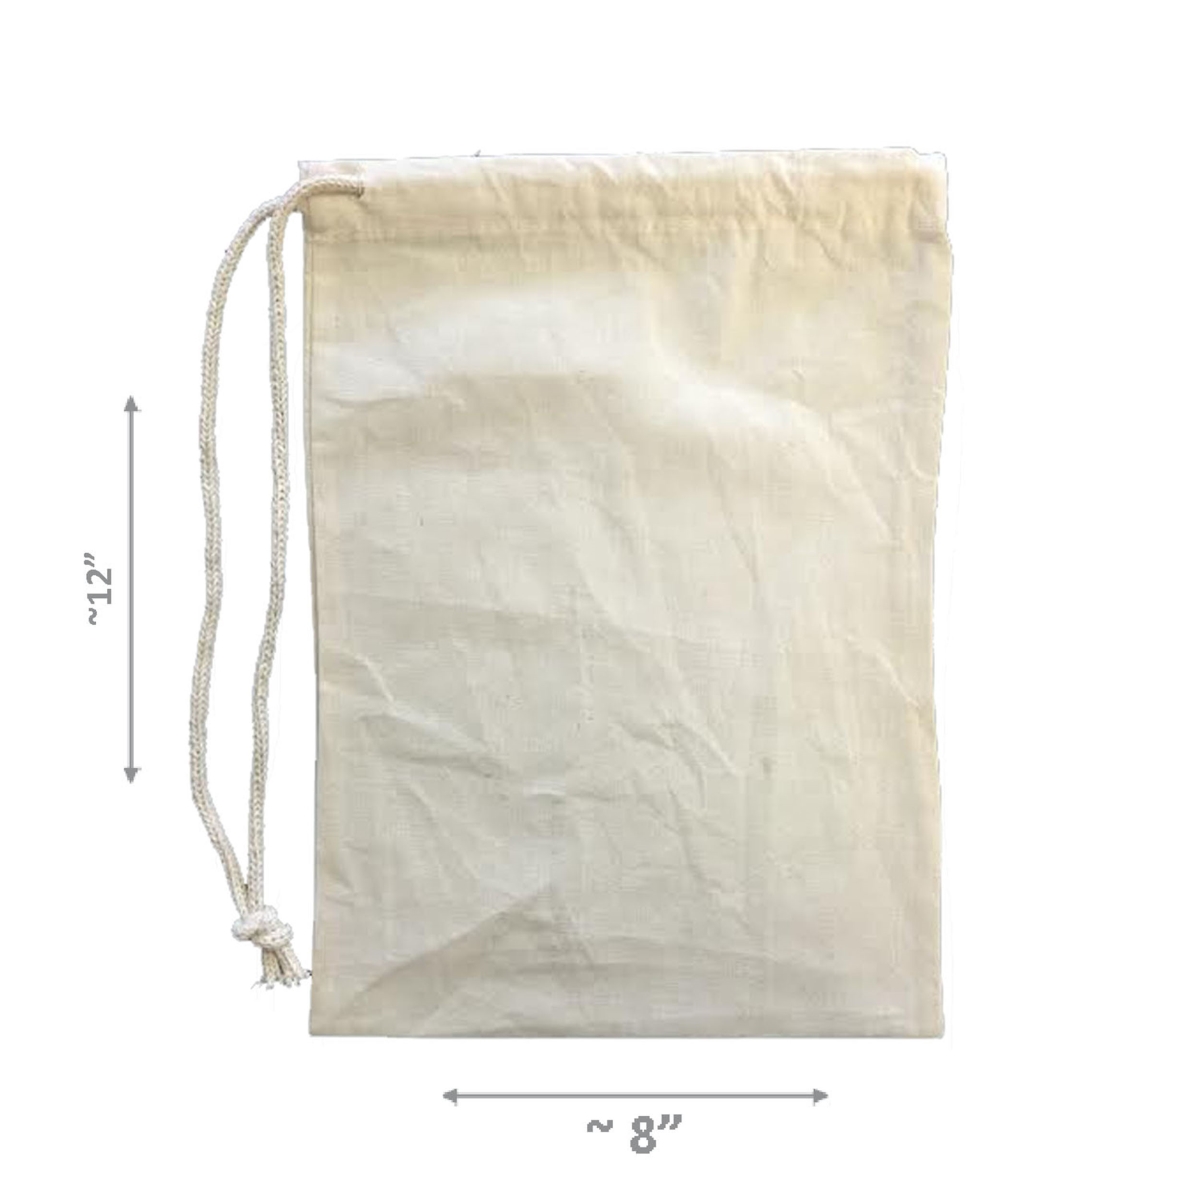 Muslinbag8x12-pack50 100 Percent Cotton Durable Drawstring Muslin Produce Storage Bags, Natural - 8 X 12 In. - Pack Of 50